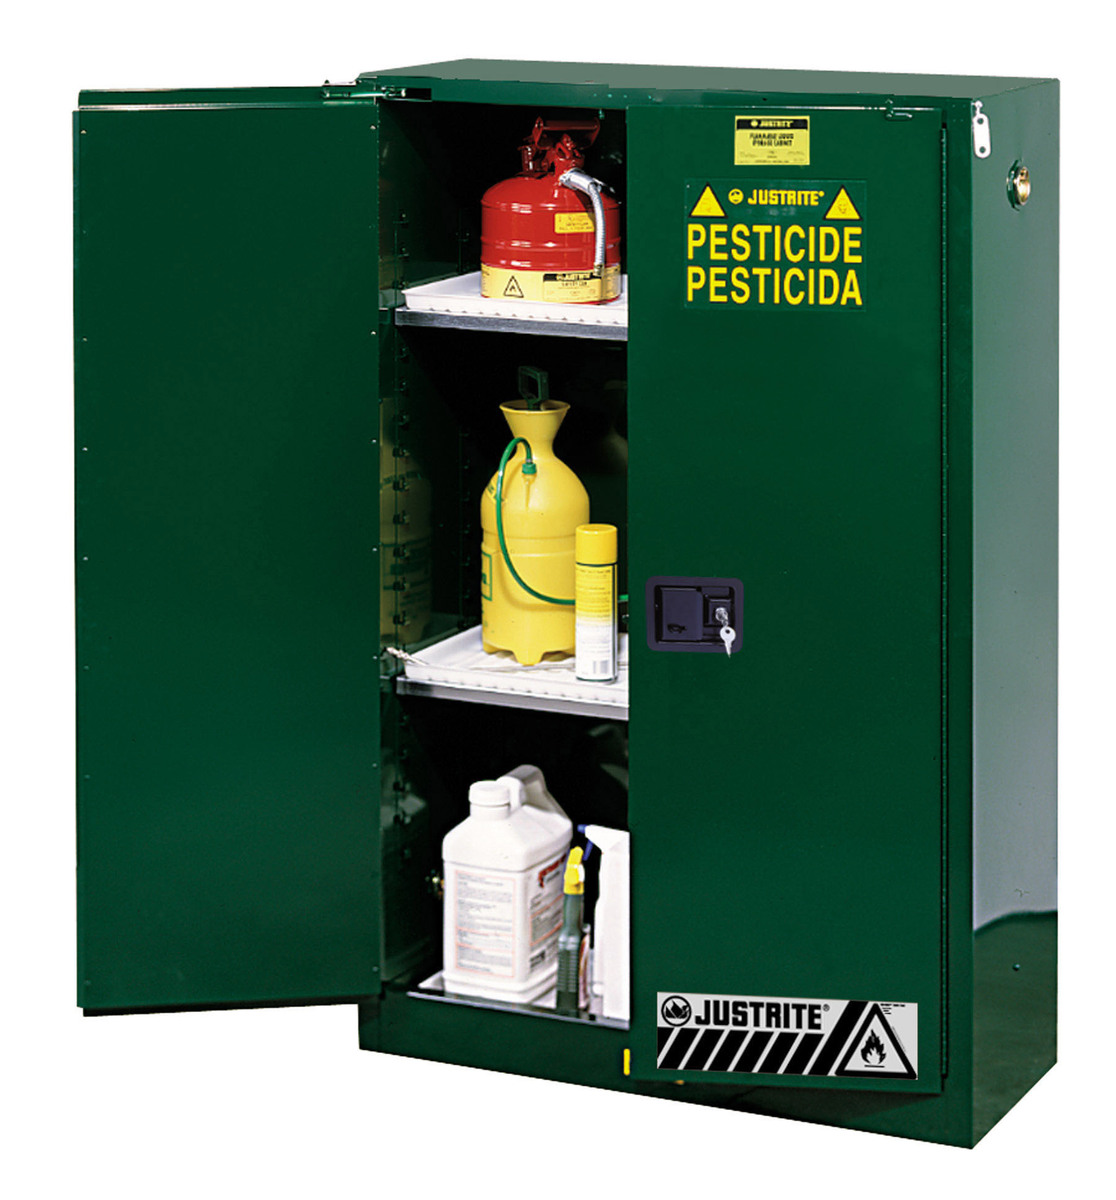 Justrite™ 60 Gallon Green Sure-Grip® EX 18 Gauge Cold Rolled Steel Safety Cabinet With (2) Manual Close Doors And (2) Adjustable